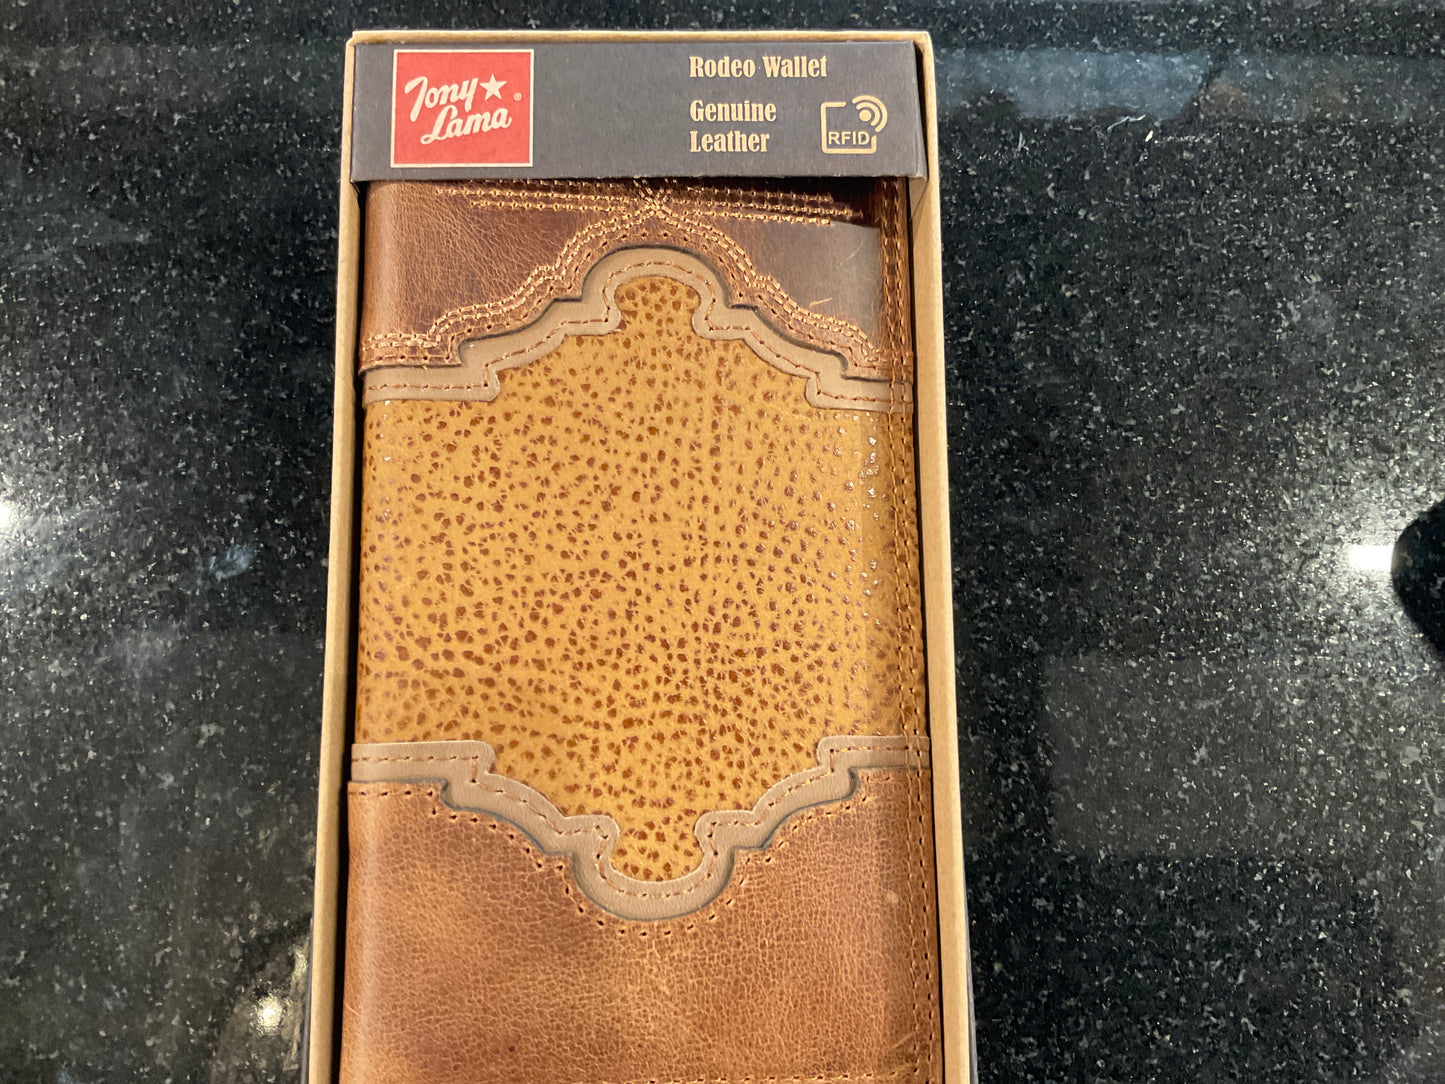 Tony lama spotted leather rodeo wallet